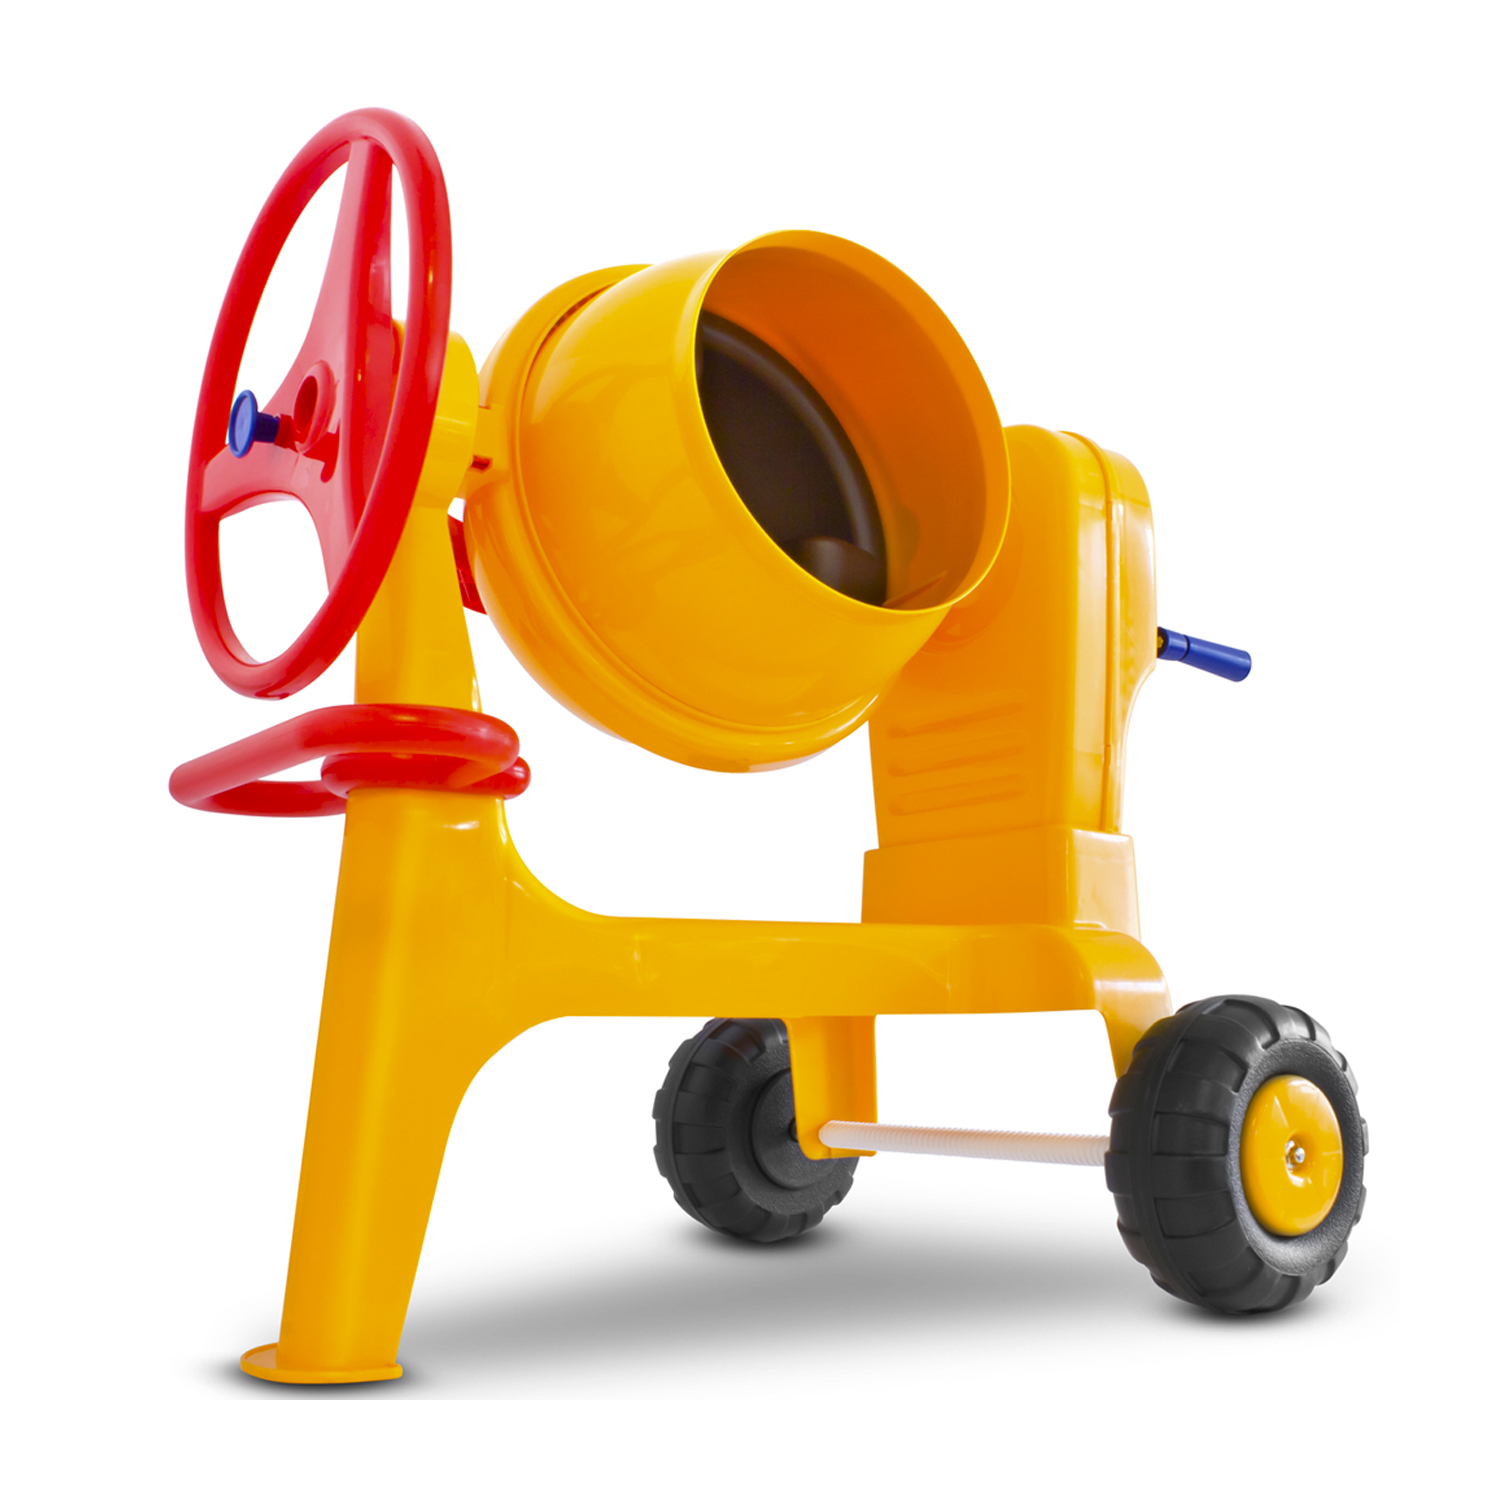 Amloid Wader Toy Cement Mixer